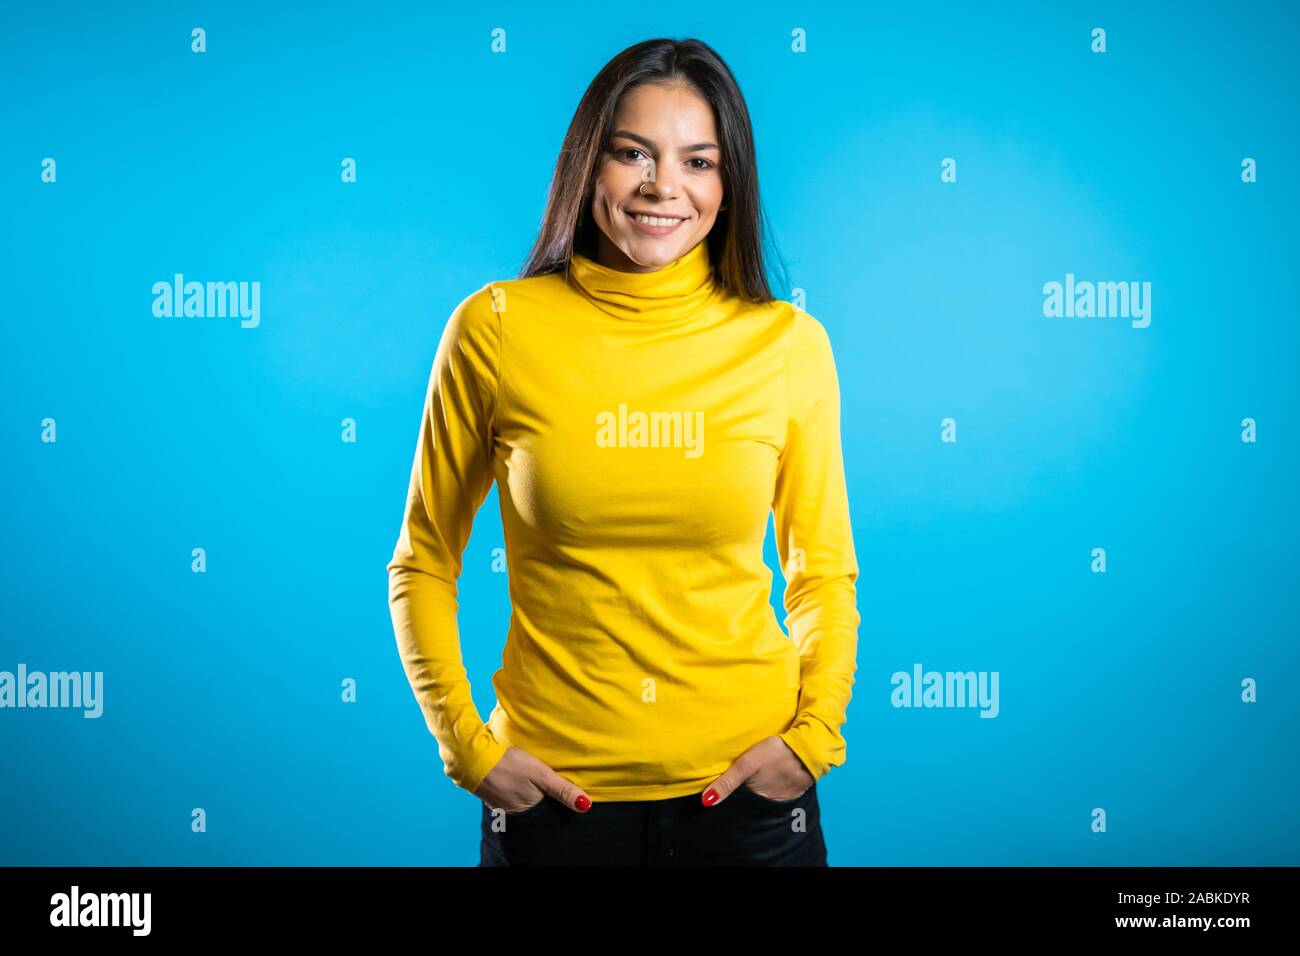 Beautiful cheerful mixed race woman in yellow clothing smiling over blue wall background. Cute hispanic girl's portrait. Stock Photo